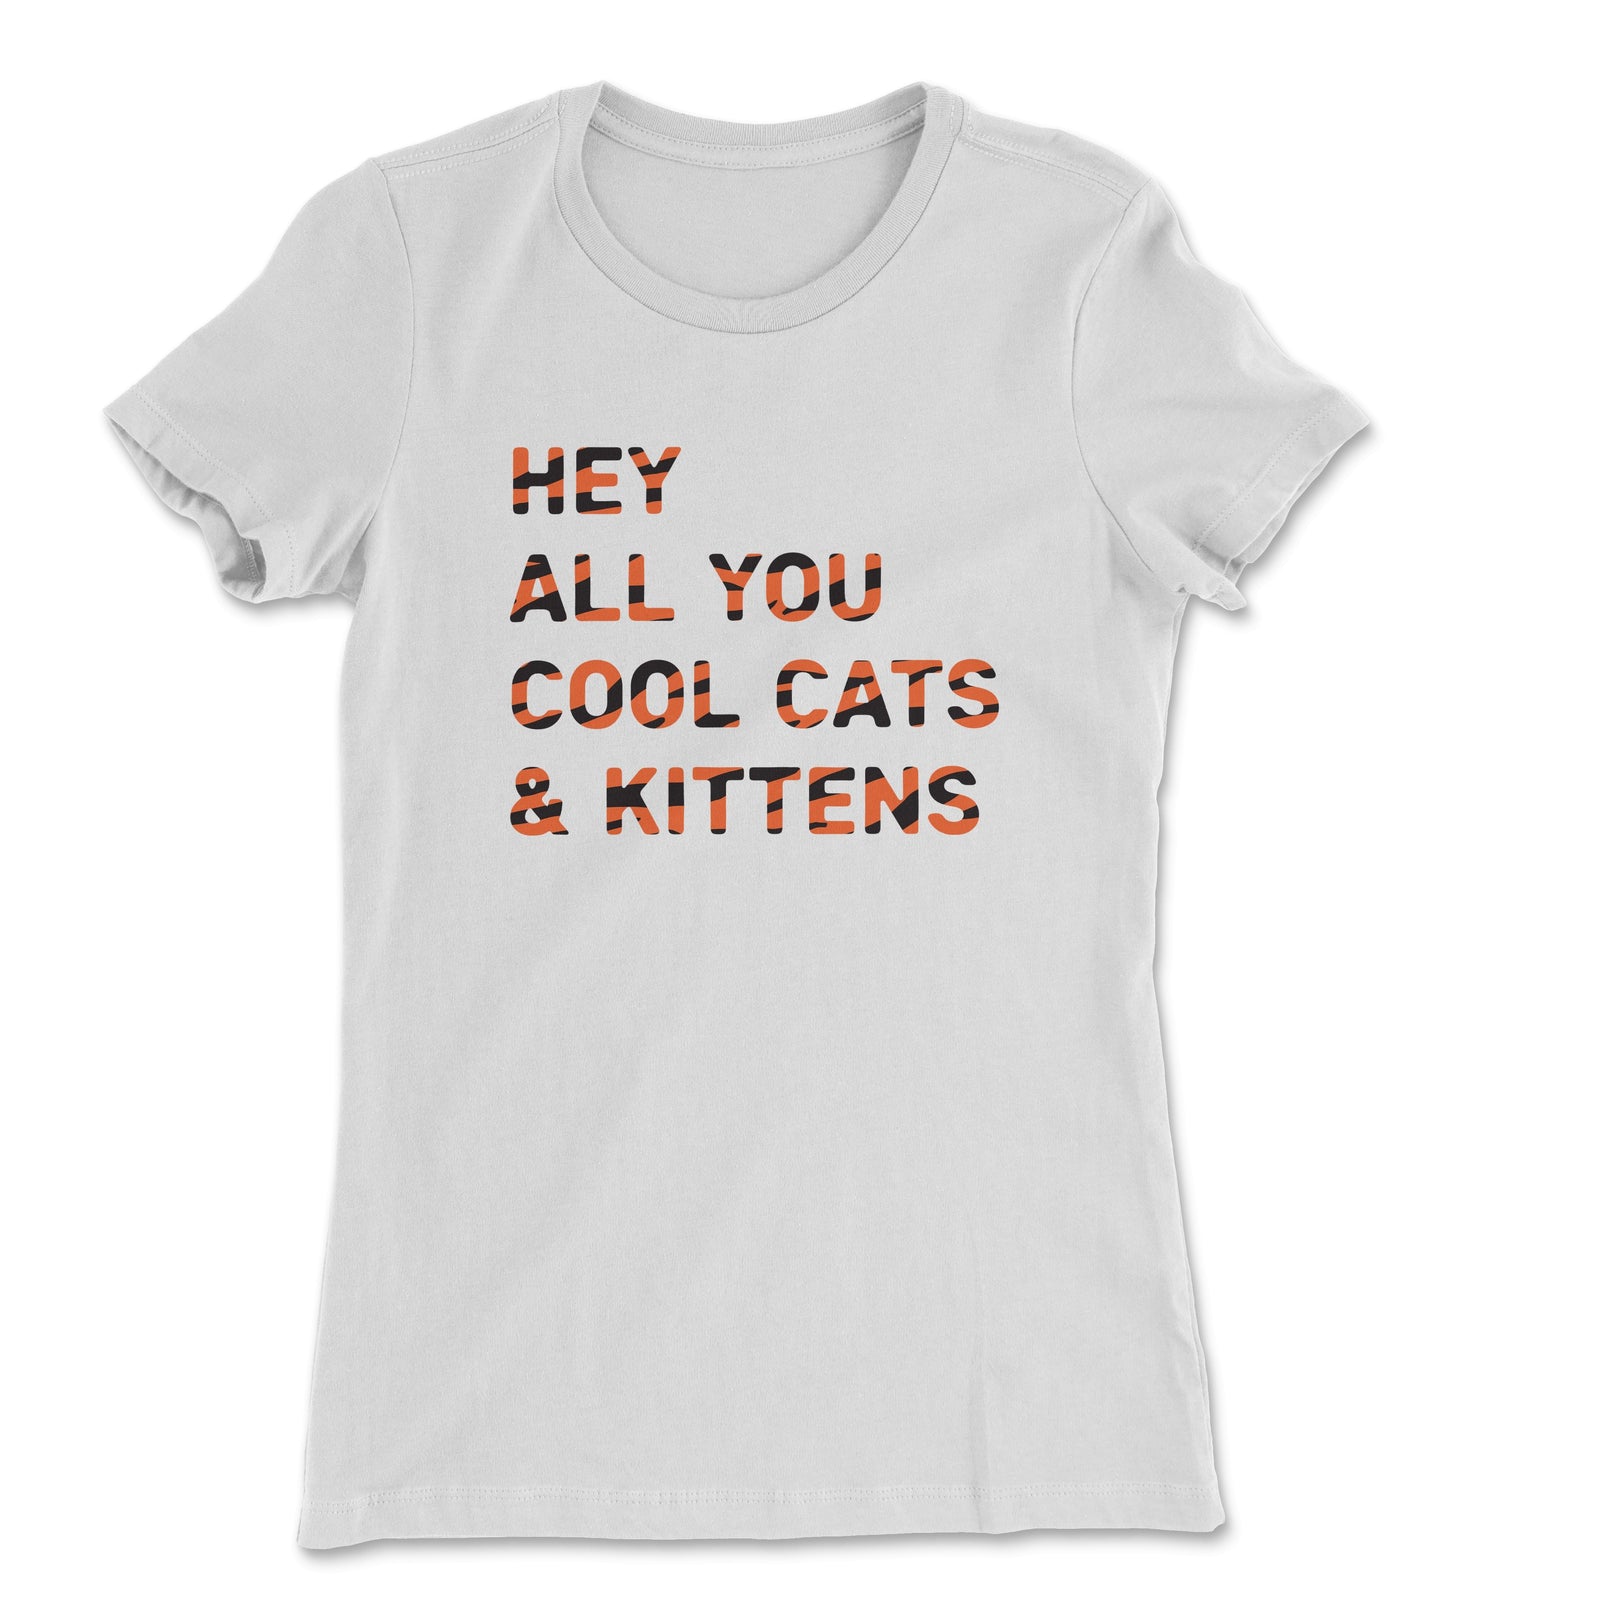 //cdn.shopify.com/s/files/1/0274/2488/2766/products/hey-all-you-cool-cats-and-kittens-womens-t-shirt-577206_5000x.jpg?v=1658389710 5000w,
    //cdn.shopify.com/s/files/1/0274/2488/2766/products/hey-all-you-cool-cats-and-kittens-womens-t-shirt-577206_4500x.jpg?v=1658389710 4500w,
    //cdn.shopify.com/s/files/1/0274/2488/2766/products/hey-all-you-cool-cats-and-kittens-womens-t-shirt-577206_4000x.jpg?v=1658389710 4000w,
    //cdn.shopify.com/s/files/1/0274/2488/2766/products/hey-all-you-cool-cats-and-kittens-womens-t-shirt-577206_3500x.jpg?v=1658389710 3500w,
    //cdn.shopify.com/s/files/1/0274/2488/2766/products/hey-all-you-cool-cats-and-kittens-womens-t-shirt-577206_3000x.jpg?v=1658389710 3000w,
    //cdn.shopify.com/s/files/1/0274/2488/2766/products/hey-all-you-cool-cats-and-kittens-womens-t-shirt-577206_2500x.jpg?v=1658389710 2500w,
    //cdn.shopify.com/s/files/1/0274/2488/2766/products/hey-all-you-cool-cats-and-kittens-womens-t-shirt-577206_2000x.jpg?v=1658389710 2000w,
    //cdn.shopify.com/s/files/1/0274/2488/2766/products/hey-all-you-cool-cats-and-kittens-womens-t-shirt-577206_1800x.jpg?v=1658389710 1800w,
    //cdn.shopify.com/s/files/1/0274/2488/2766/products/hey-all-you-cool-cats-and-kittens-womens-t-shirt-577206_1600x.jpg?v=1658389710 1600w,
    //cdn.shopify.com/s/files/1/0274/2488/2766/products/hey-all-you-cool-cats-and-kittens-womens-t-shirt-577206_1400x.jpg?v=1658389710 1400w,
    //cdn.shopify.com/s/files/1/0274/2488/2766/products/hey-all-you-cool-cats-and-kittens-womens-t-shirt-577206_1200x.jpg?v=1658389710 1200w,
    //cdn.shopify.com/s/files/1/0274/2488/2766/products/hey-all-you-cool-cats-and-kittens-womens-t-shirt-577206_1000x.jpg?v=1658389710 1000w,
    //cdn.shopify.com/s/files/1/0274/2488/2766/products/hey-all-you-cool-cats-and-kittens-womens-t-shirt-577206_800x.jpg?v=1658389710 800w,
    //cdn.shopify.com/s/files/1/0274/2488/2766/products/hey-all-you-cool-cats-and-kittens-womens-t-shirt-577206_600x.jpg?v=1658389710 600w,
    //cdn.shopify.com/s/files/1/0274/2488/2766/products/hey-all-you-cool-cats-and-kittens-womens-t-shirt-577206_400x.jpg?v=1658389710 400w,
    //cdn.shopify.com/s/files/1/0274/2488/2766/products/hey-all-you-cool-cats-and-kittens-womens-t-shirt-577206_200x.jpg?v=1658389710 200w